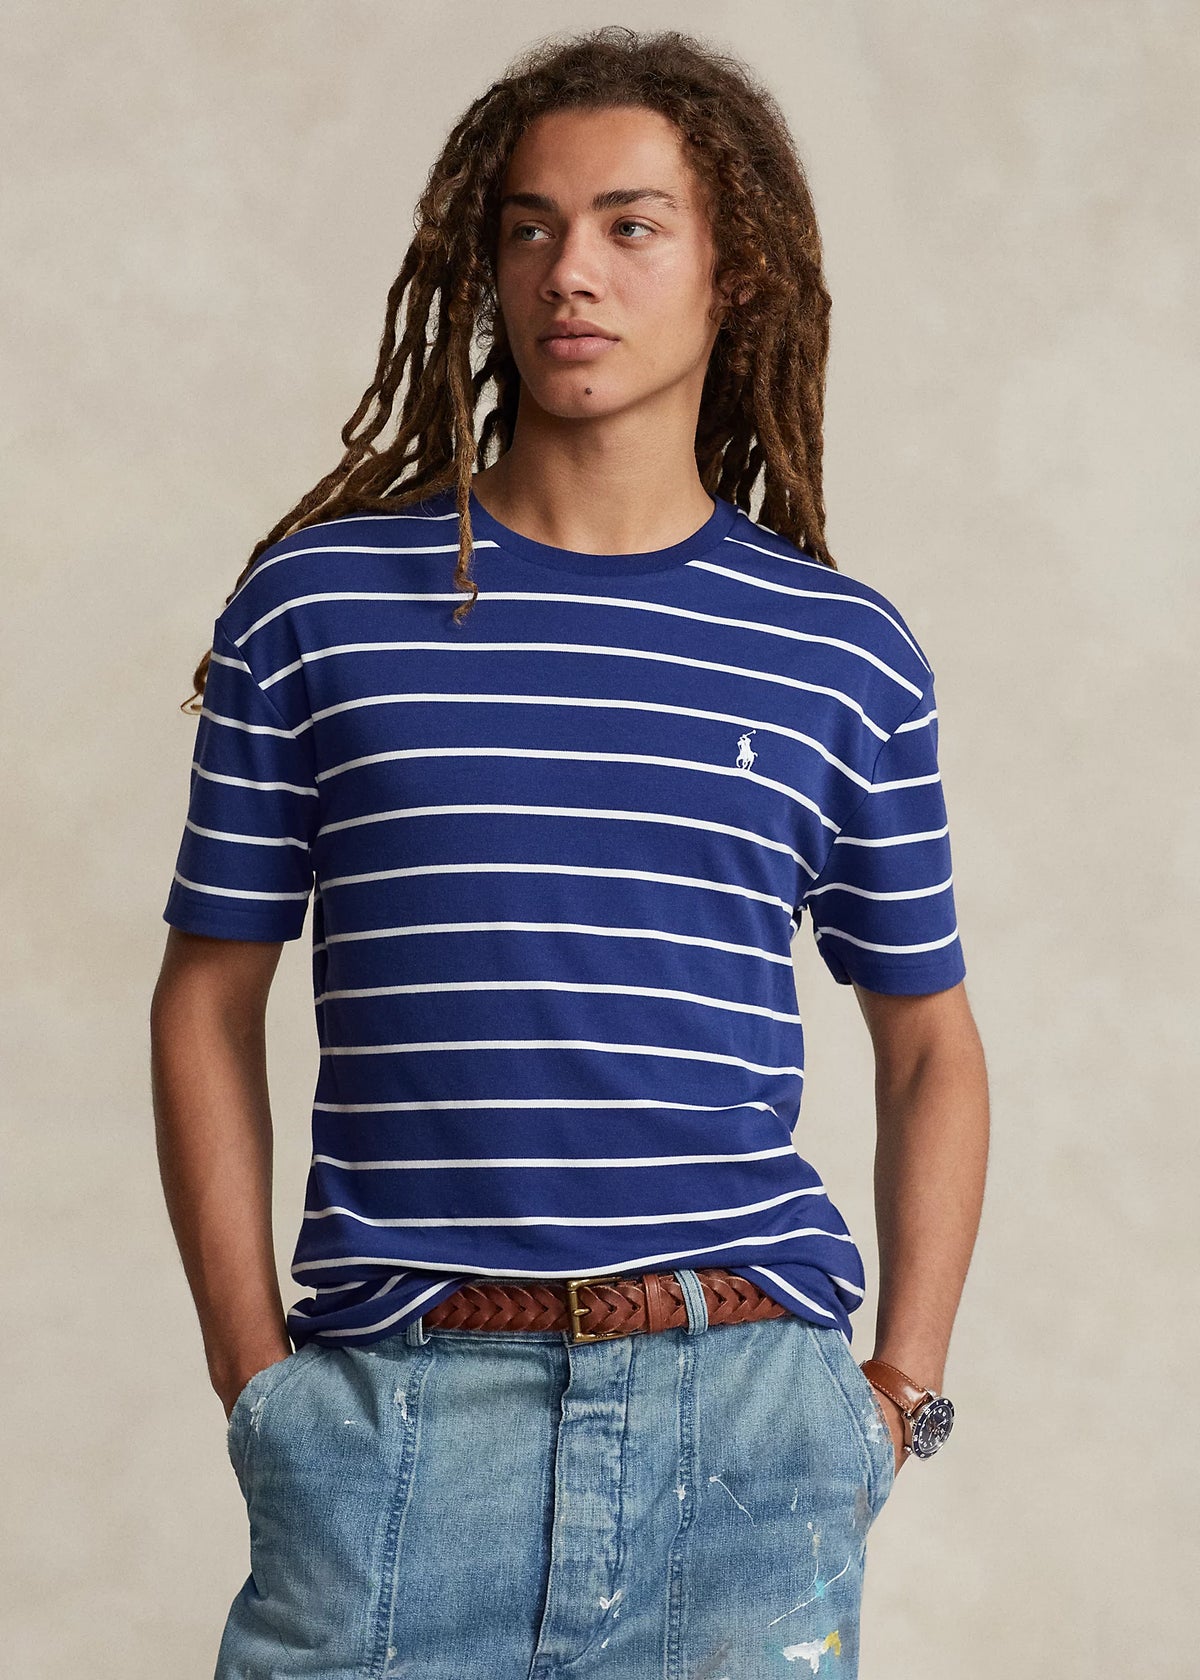 Classic Fit Striped Soft Cotton T-Shirt - Navy/White